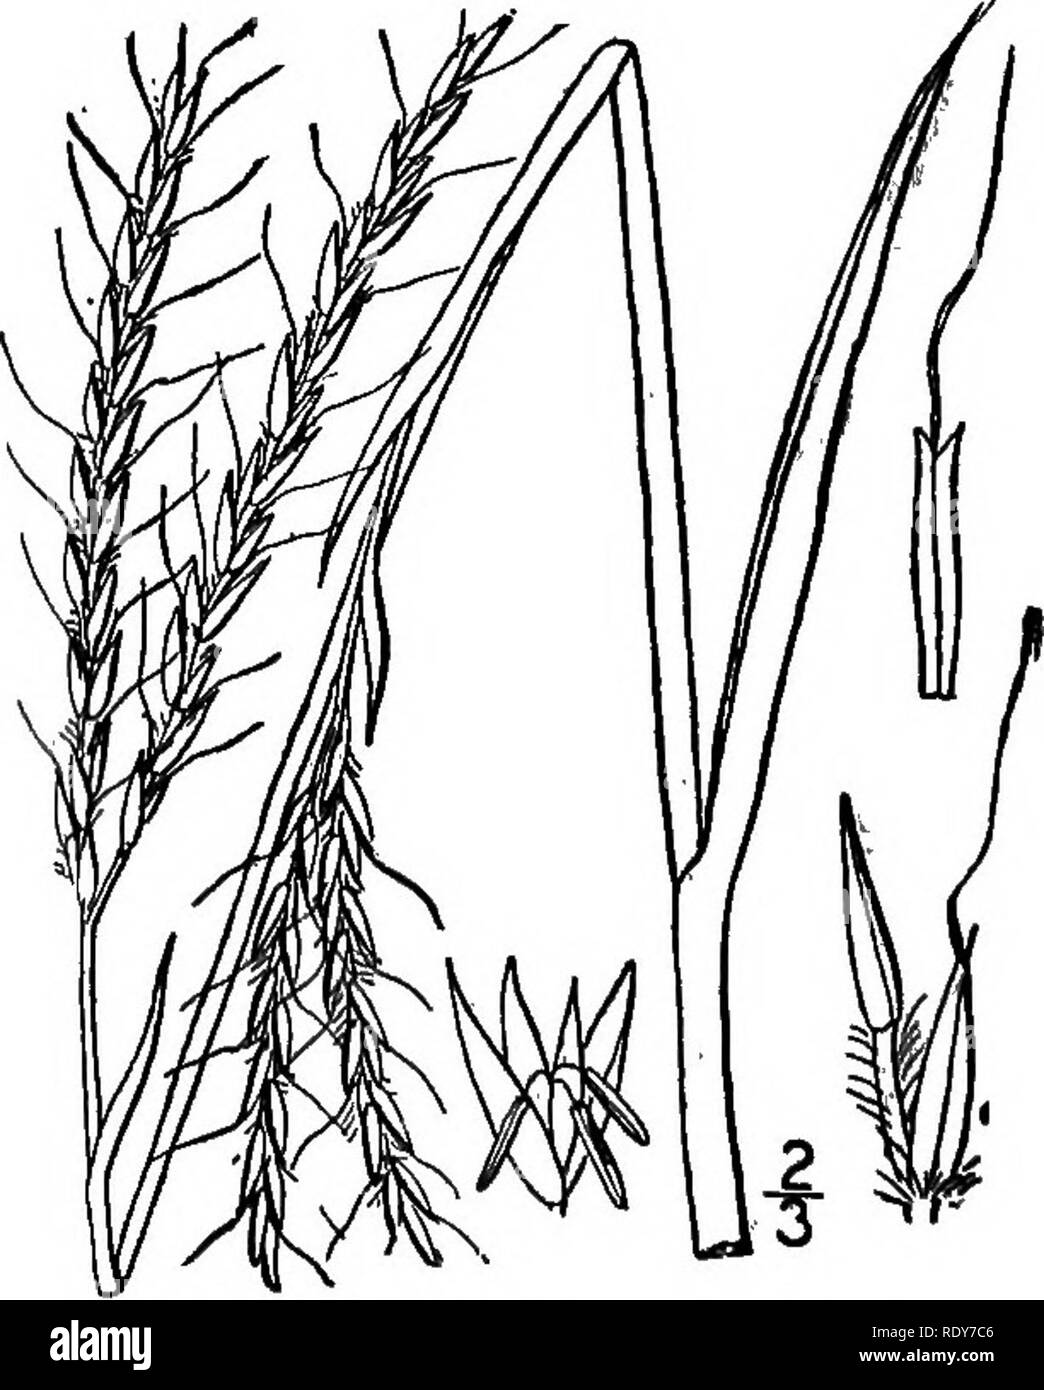 . The families of flowering plants. Plants; Phanerogams. Fig. 19.—Barnyard grass {Panicum Crus-gaUi). (After Britton and Brown, 111. m. Northern U. S.) gions to the lofty arborescent bamboos of the tropics. The inflores- cence consists of what are technically called spikelets, each of which is made up of small imbricated chaffy scales. Some of these scales are empty; others enclose the sta- mens, usually three in number, and the pistil; and each of these flower- bearing scales usually encloses an additional, very slender scale known as the palet. Every individual floret thus conpists of the es Stock Photo